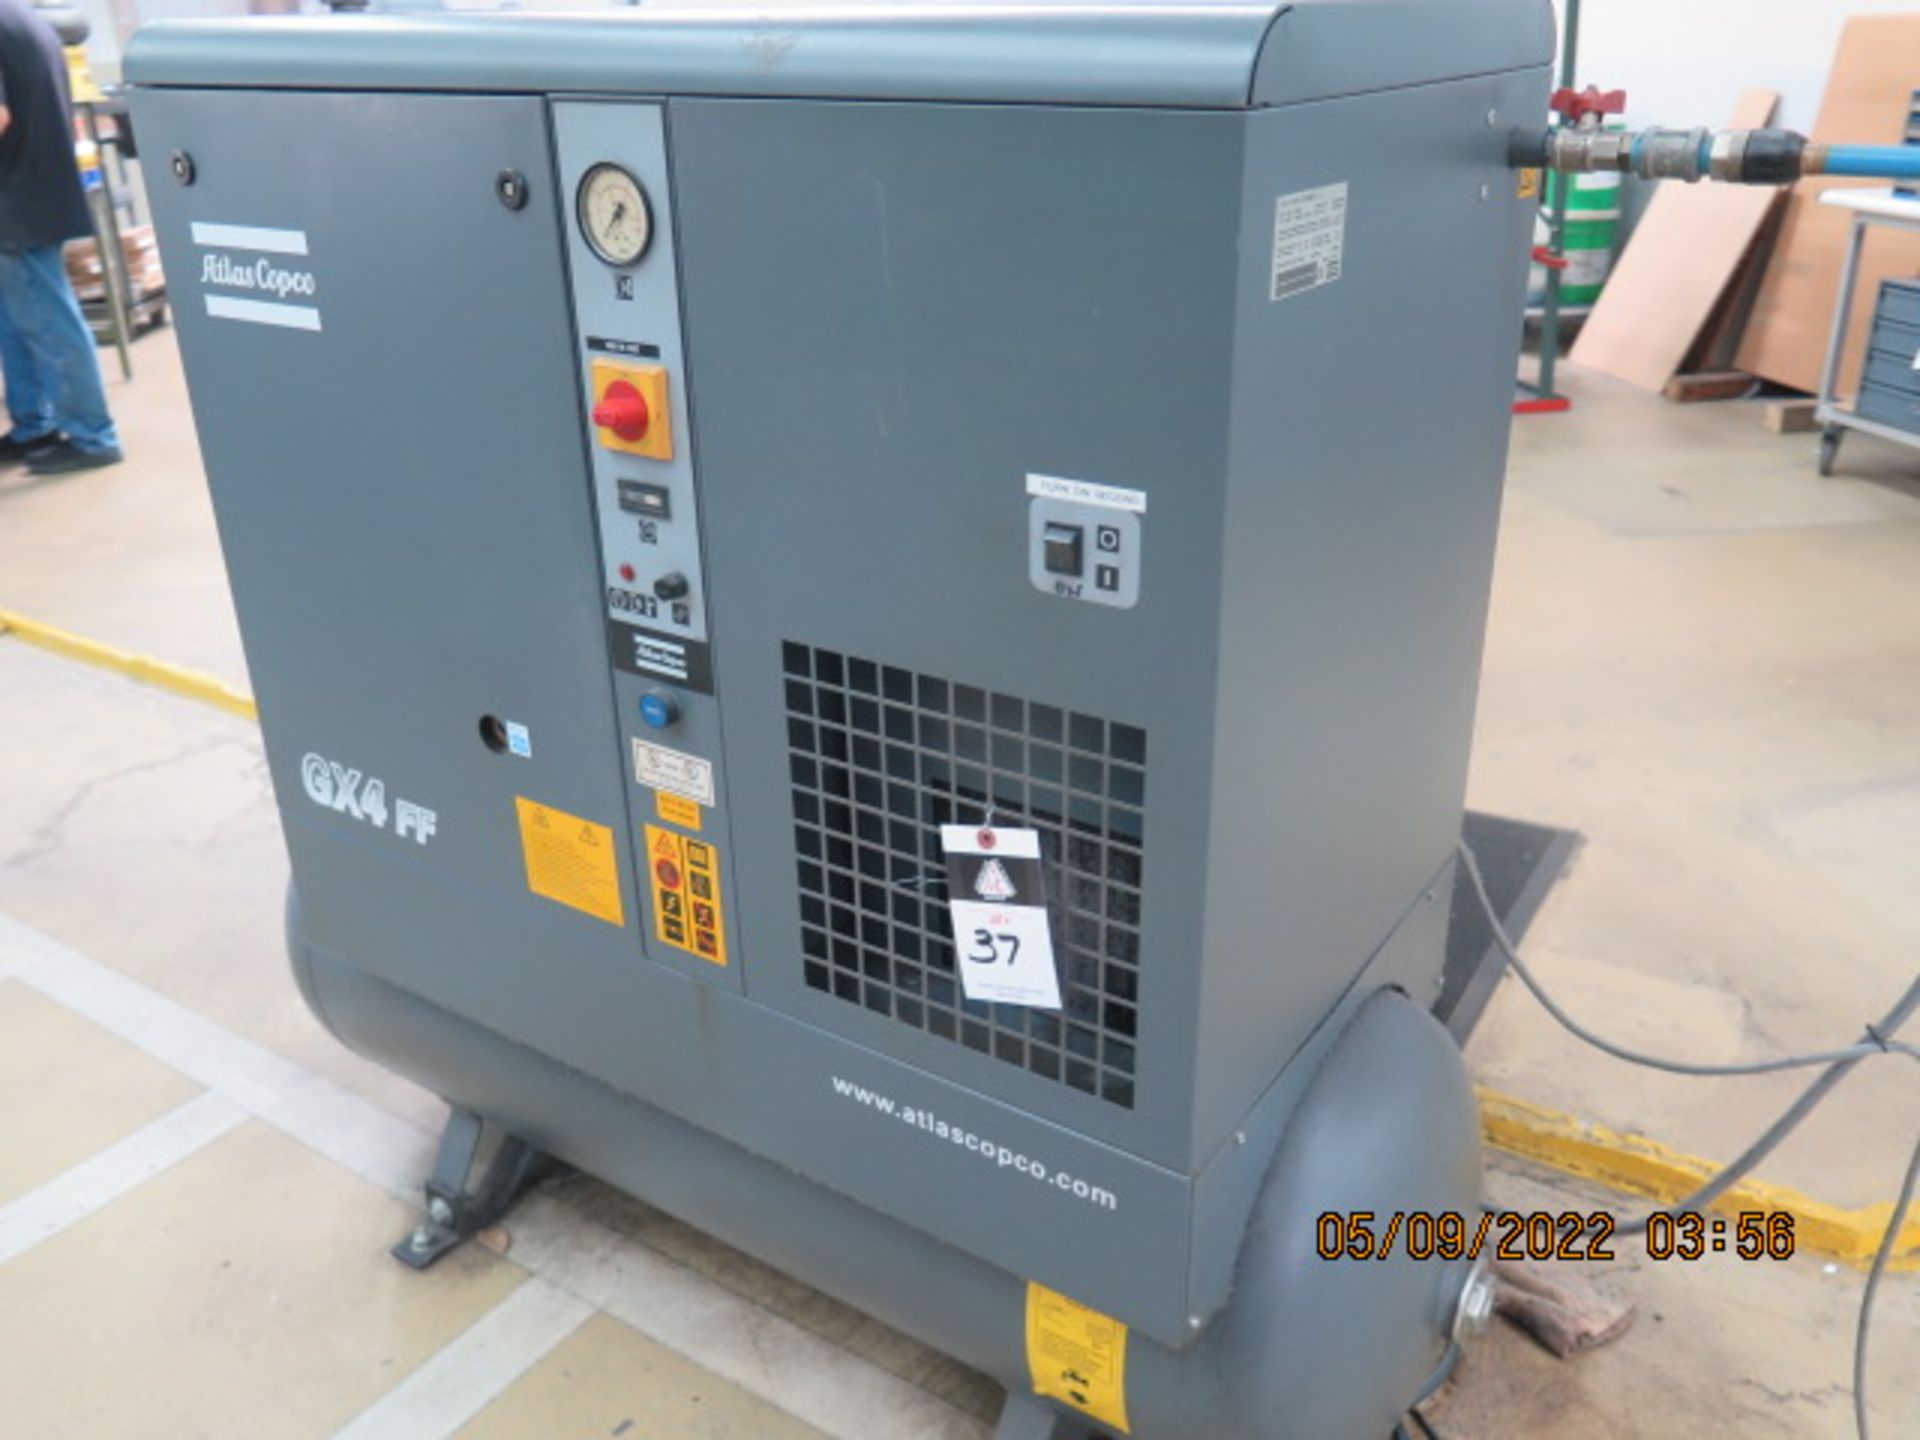 2004 Atlas Copco GX4 FF CSA/UL 5Hp Rotary Air Comp s/n AII643096 w/ Built-In Air Dryer, SOLD AS IS - Image 3 of 9